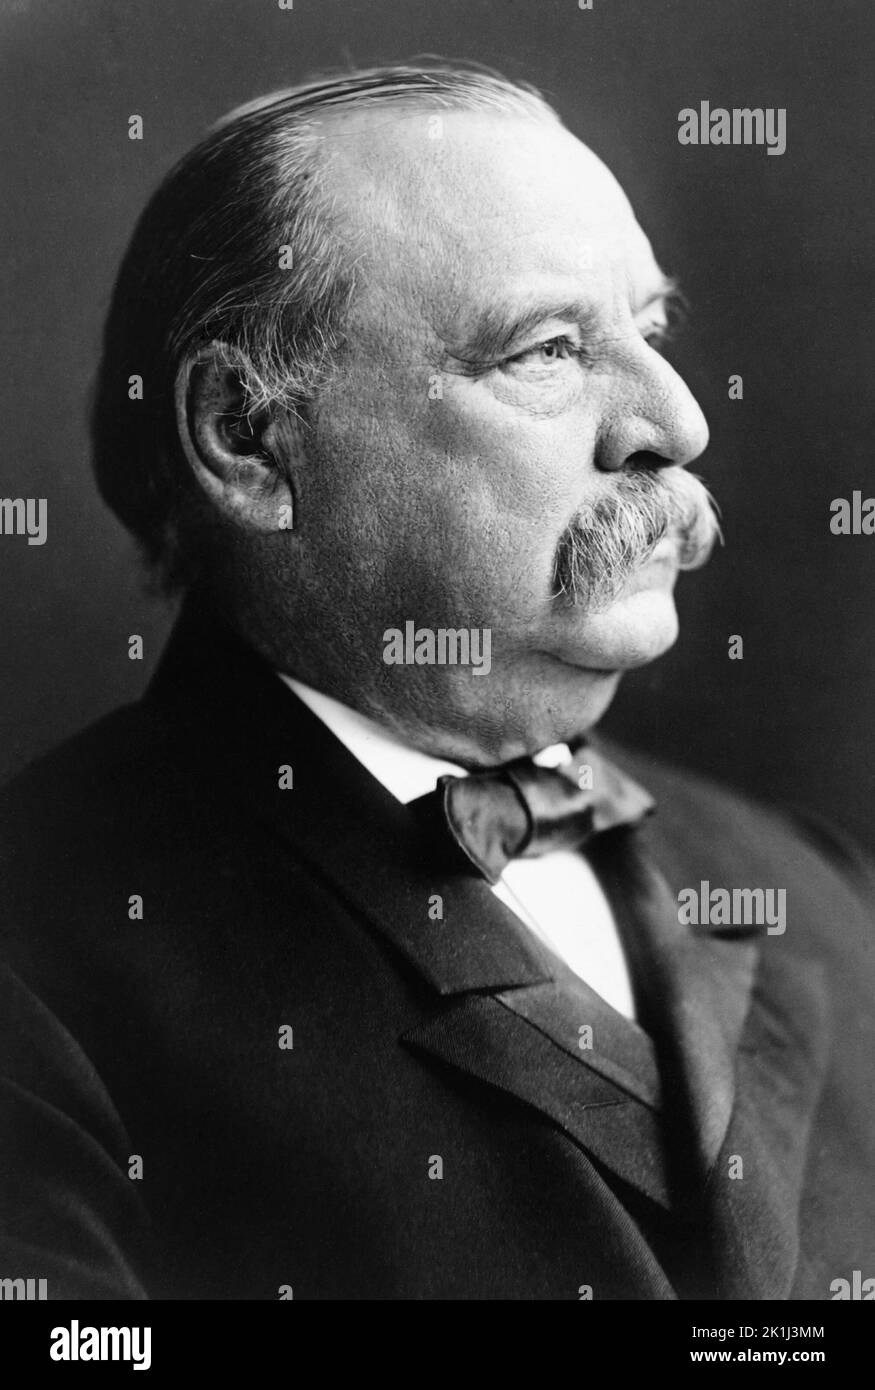 A portrait of US president Grover Cleveland from 1903 when he was 66, who was the 22nd and 24th president (and he is the only one to have won two non-consecutive mandate) Stock Photo